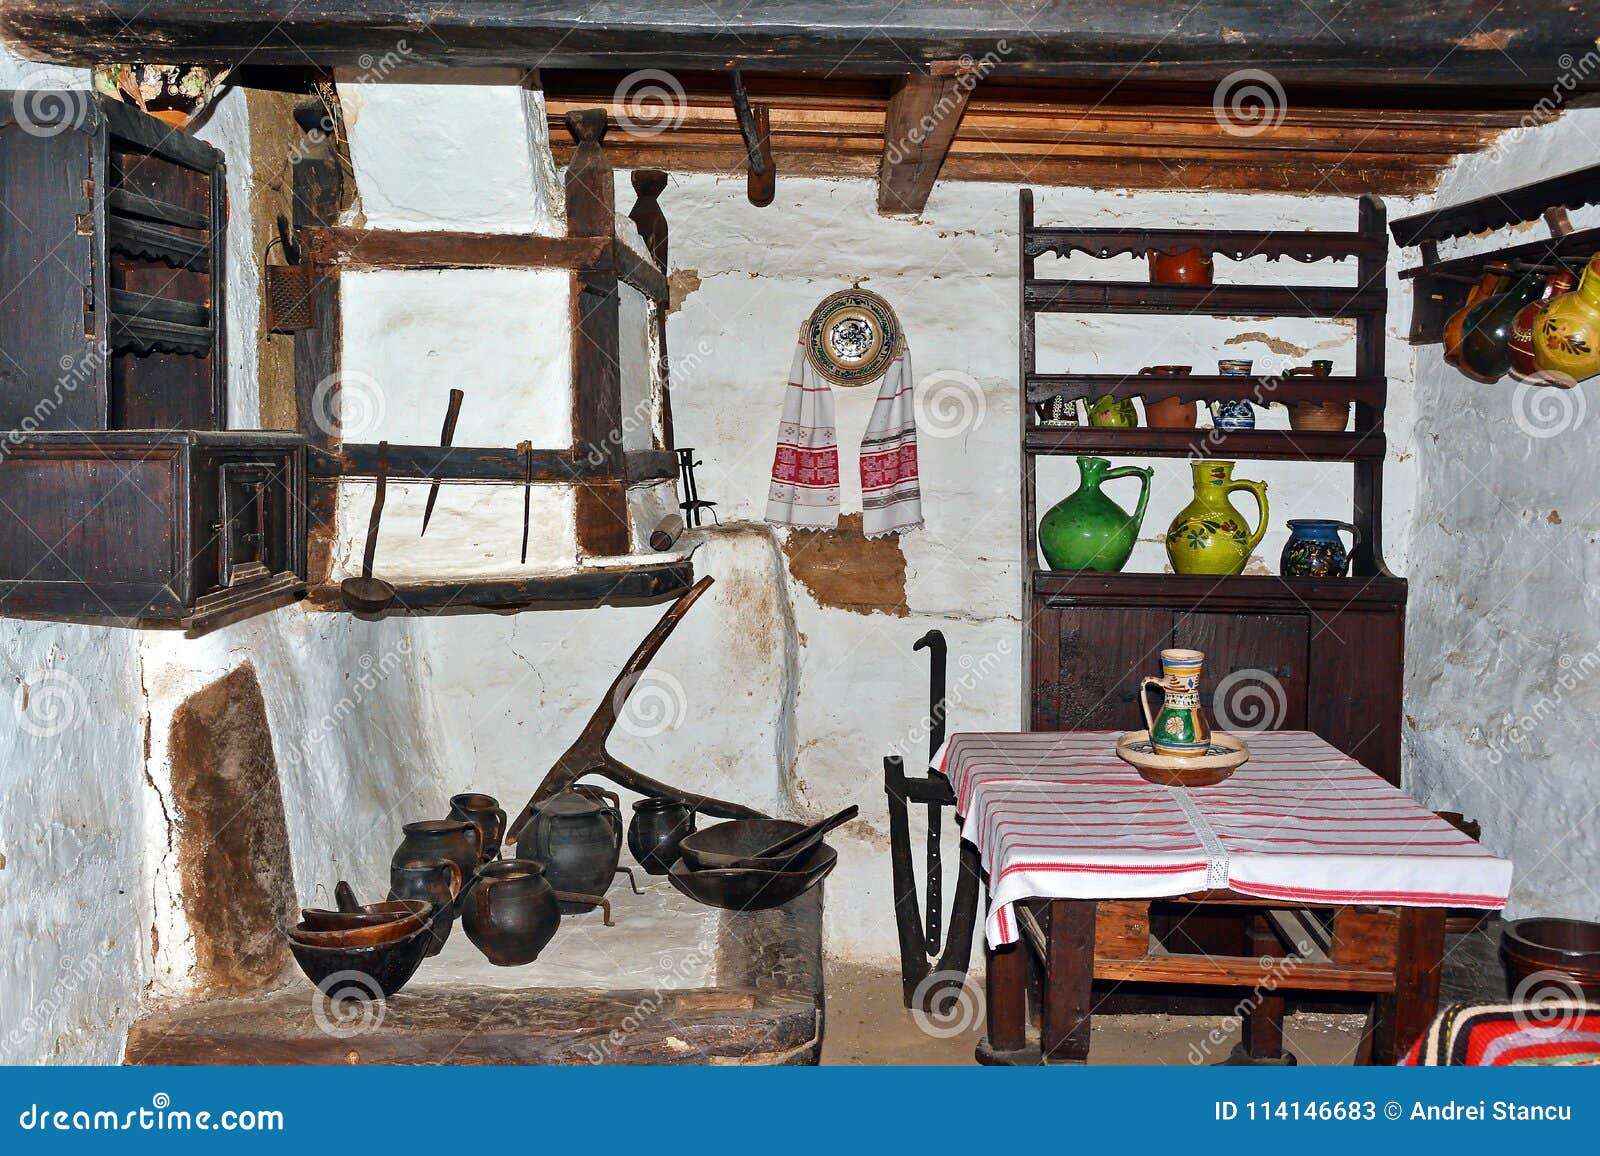 Romania Traditional House Stock Image Image Of Rustic